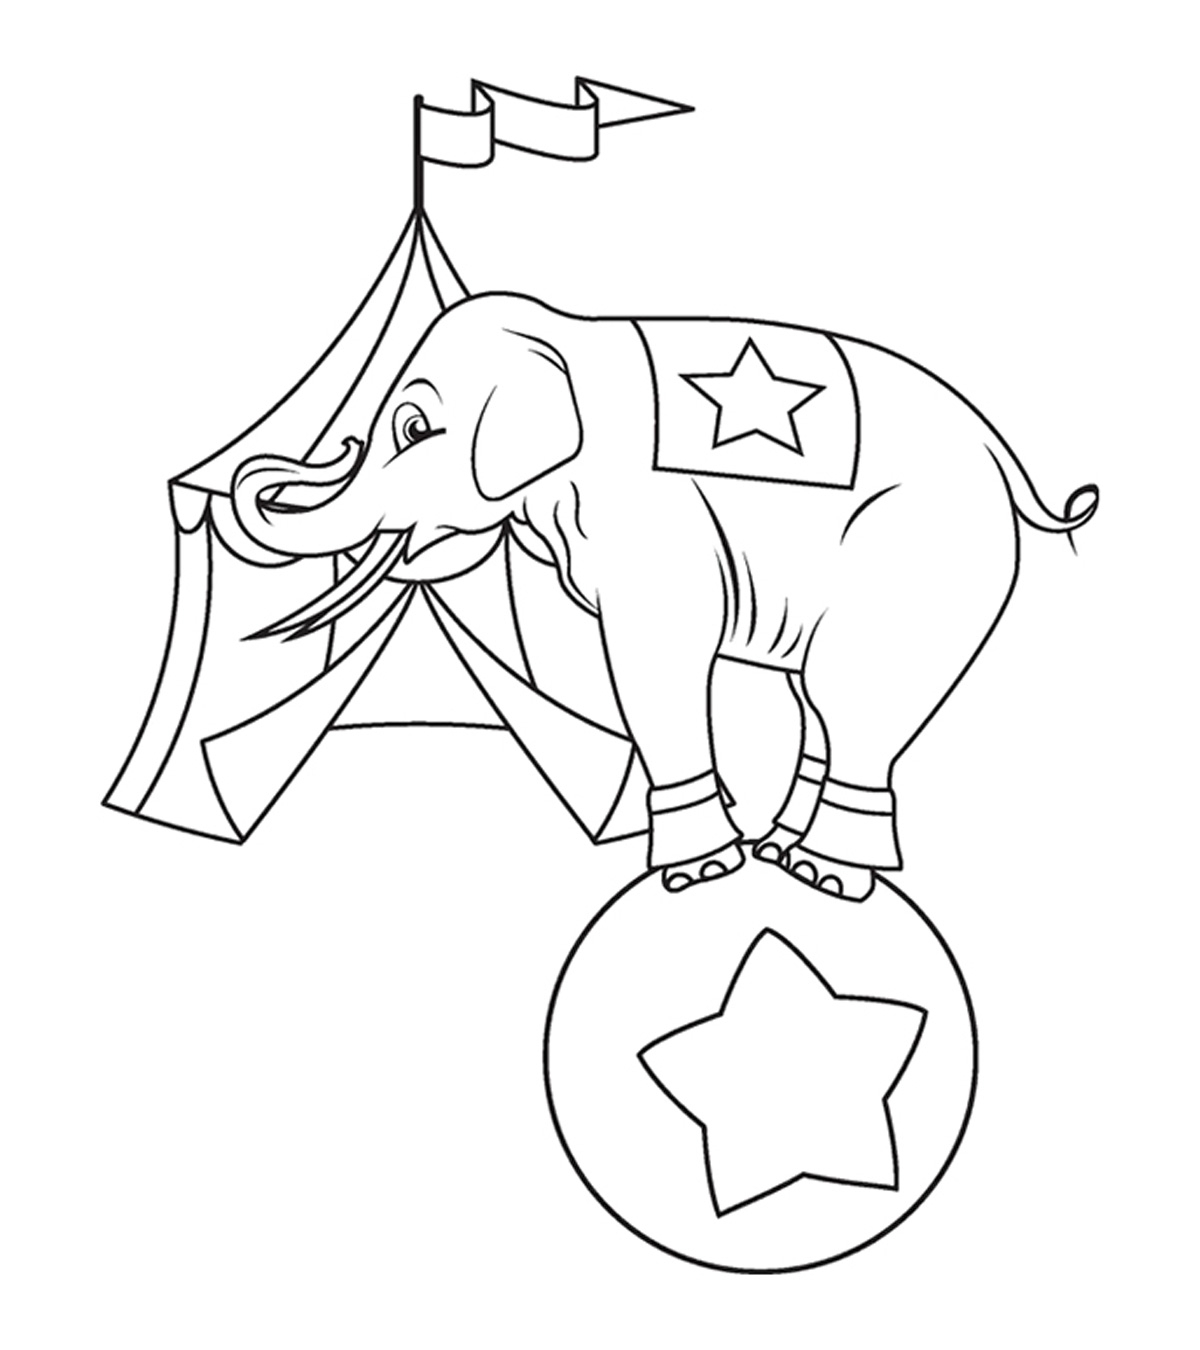 Elephant Coloring Pages For Preschool Top 20 Free Printable Elephant Coloring Pages Online